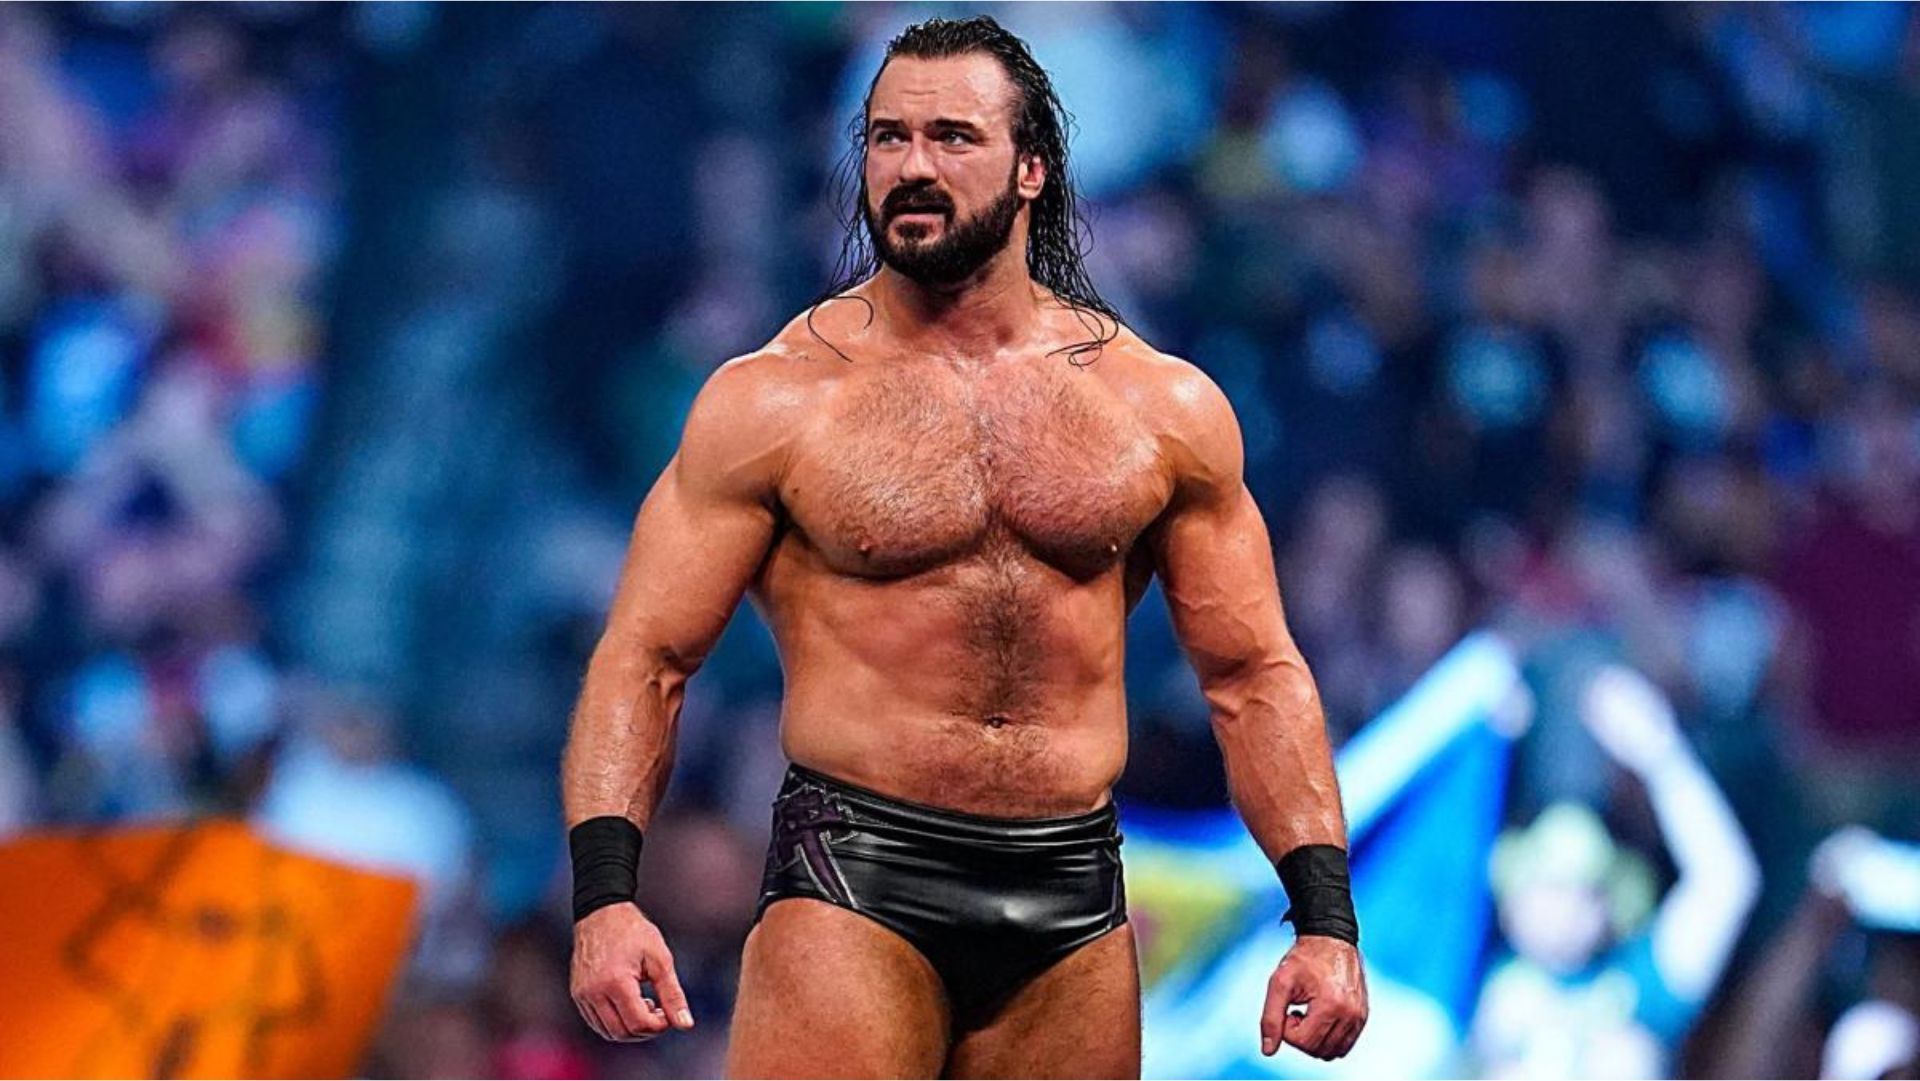 Did Drew McIntyre work through his health issue at WrestleMania 39?